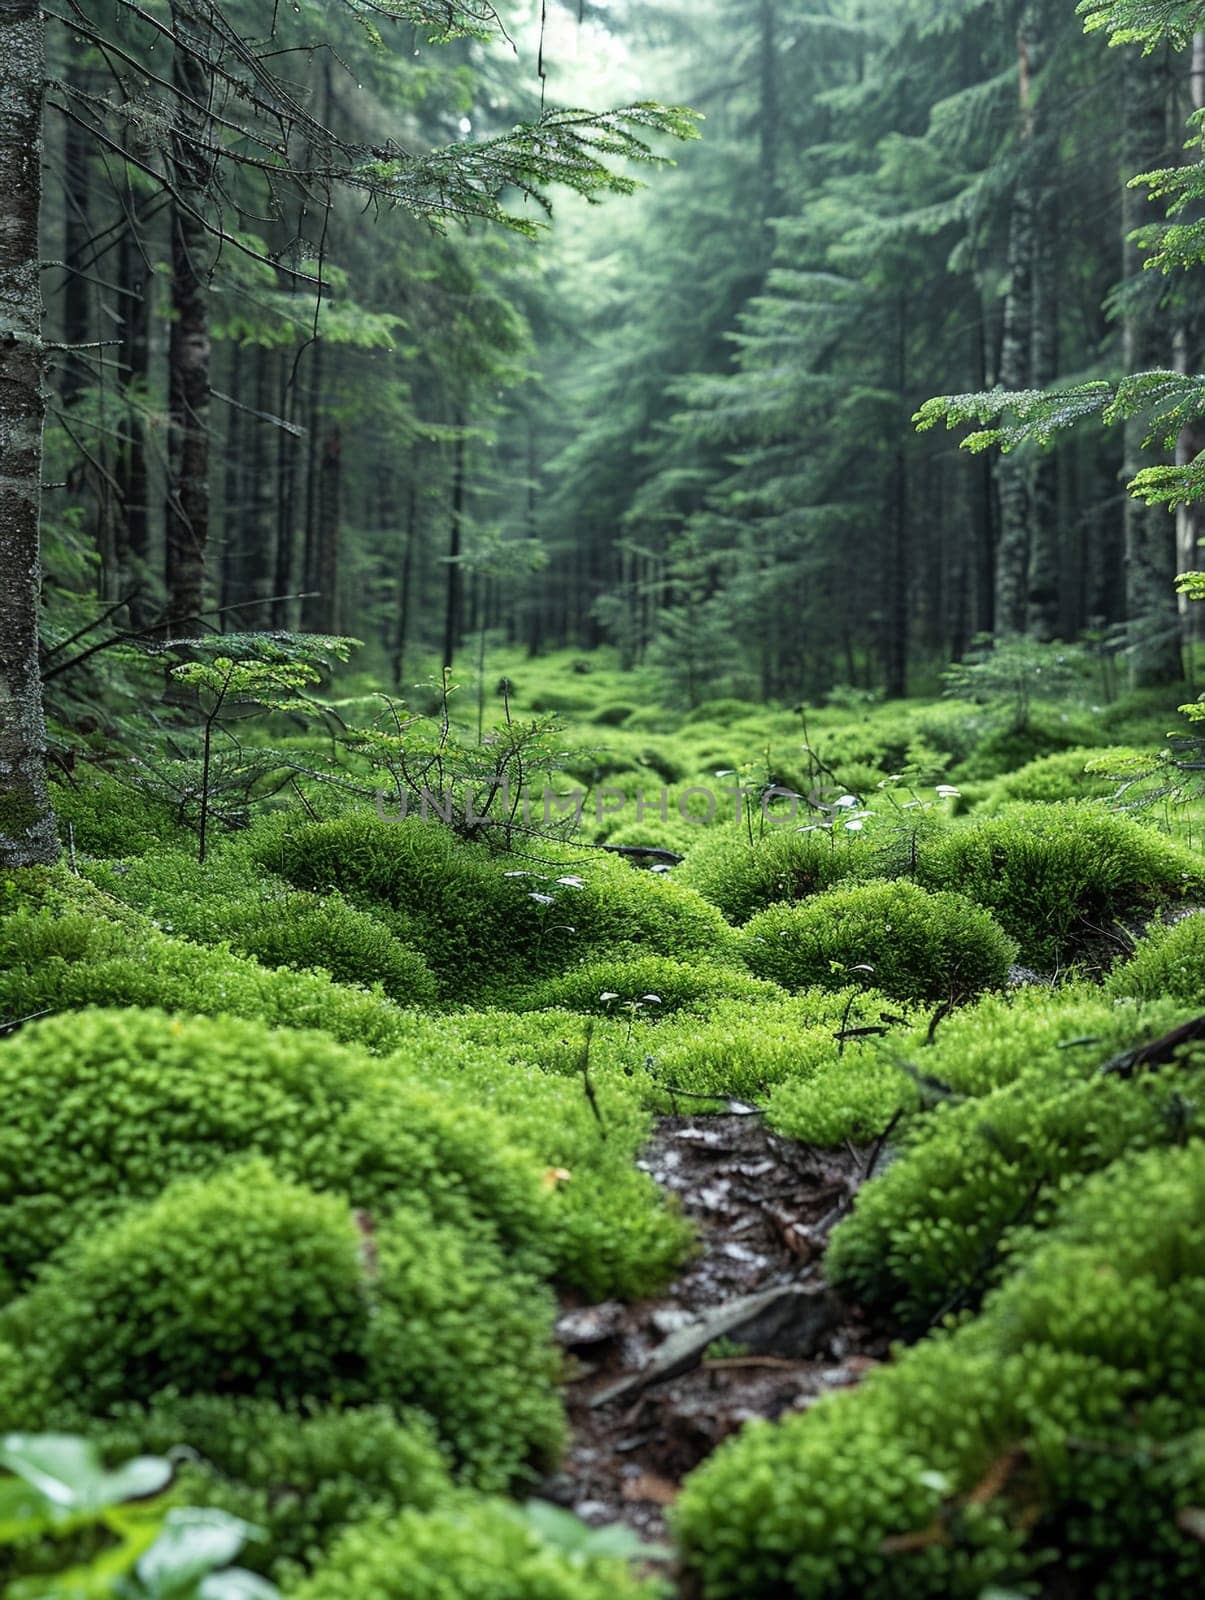 Lush green forest floor covered in moss, for nature-inspired and eco-friendly projects.